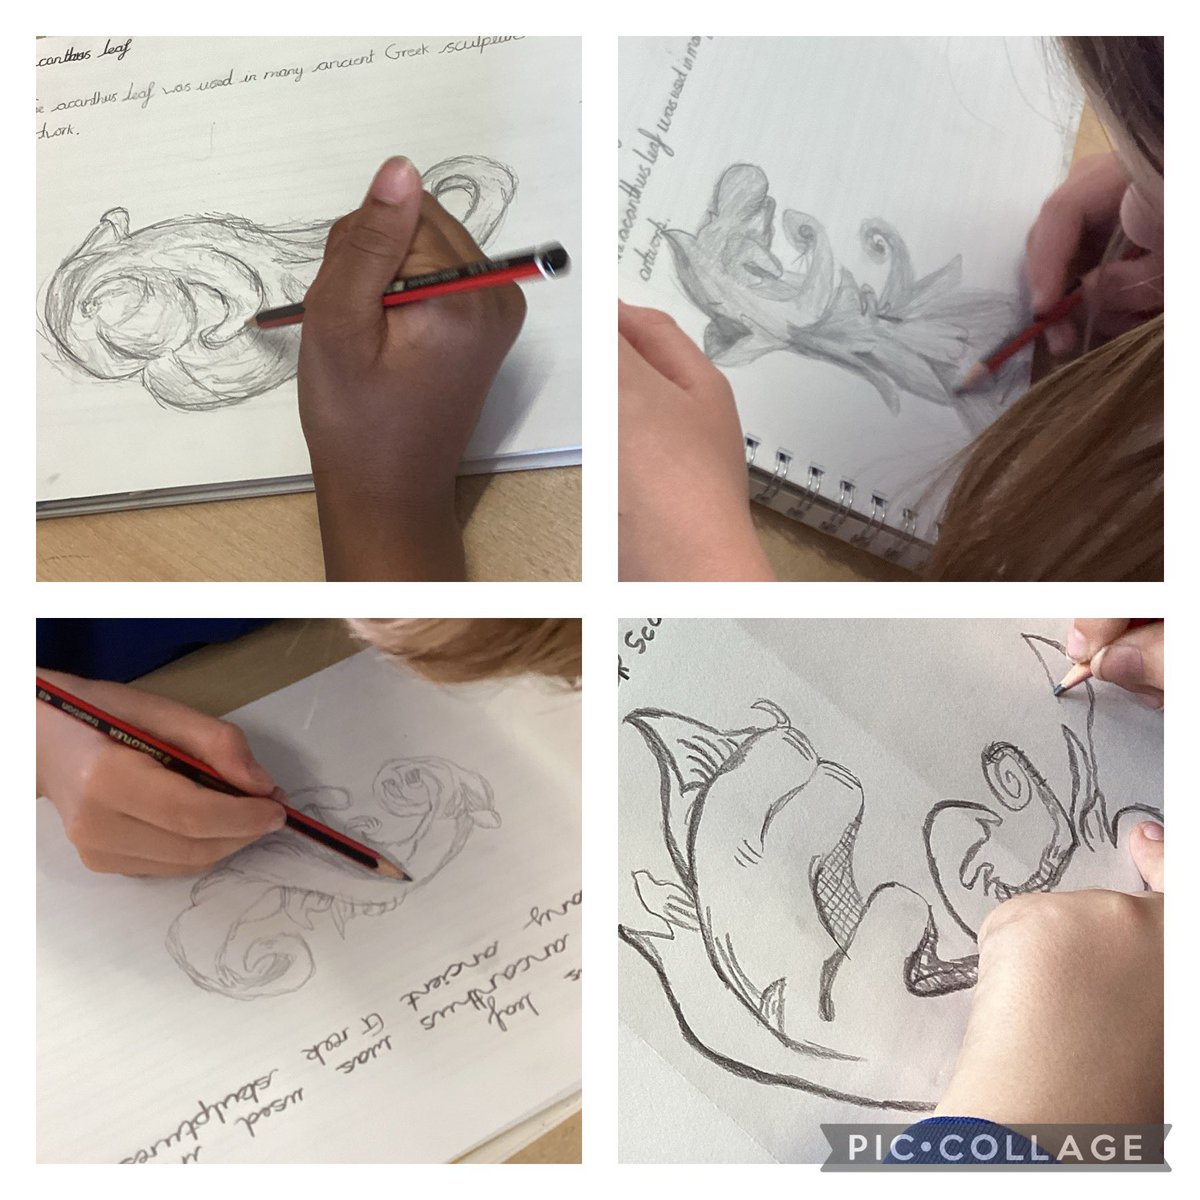 Today in our Y5 art lesson we applied our skills of creating tone using a 4B pencil. We sketched an acanthus leaf as this was often used as a motif in Ancient Greek architecture. #appliedskills #history #ancientGreece #artcurriculum